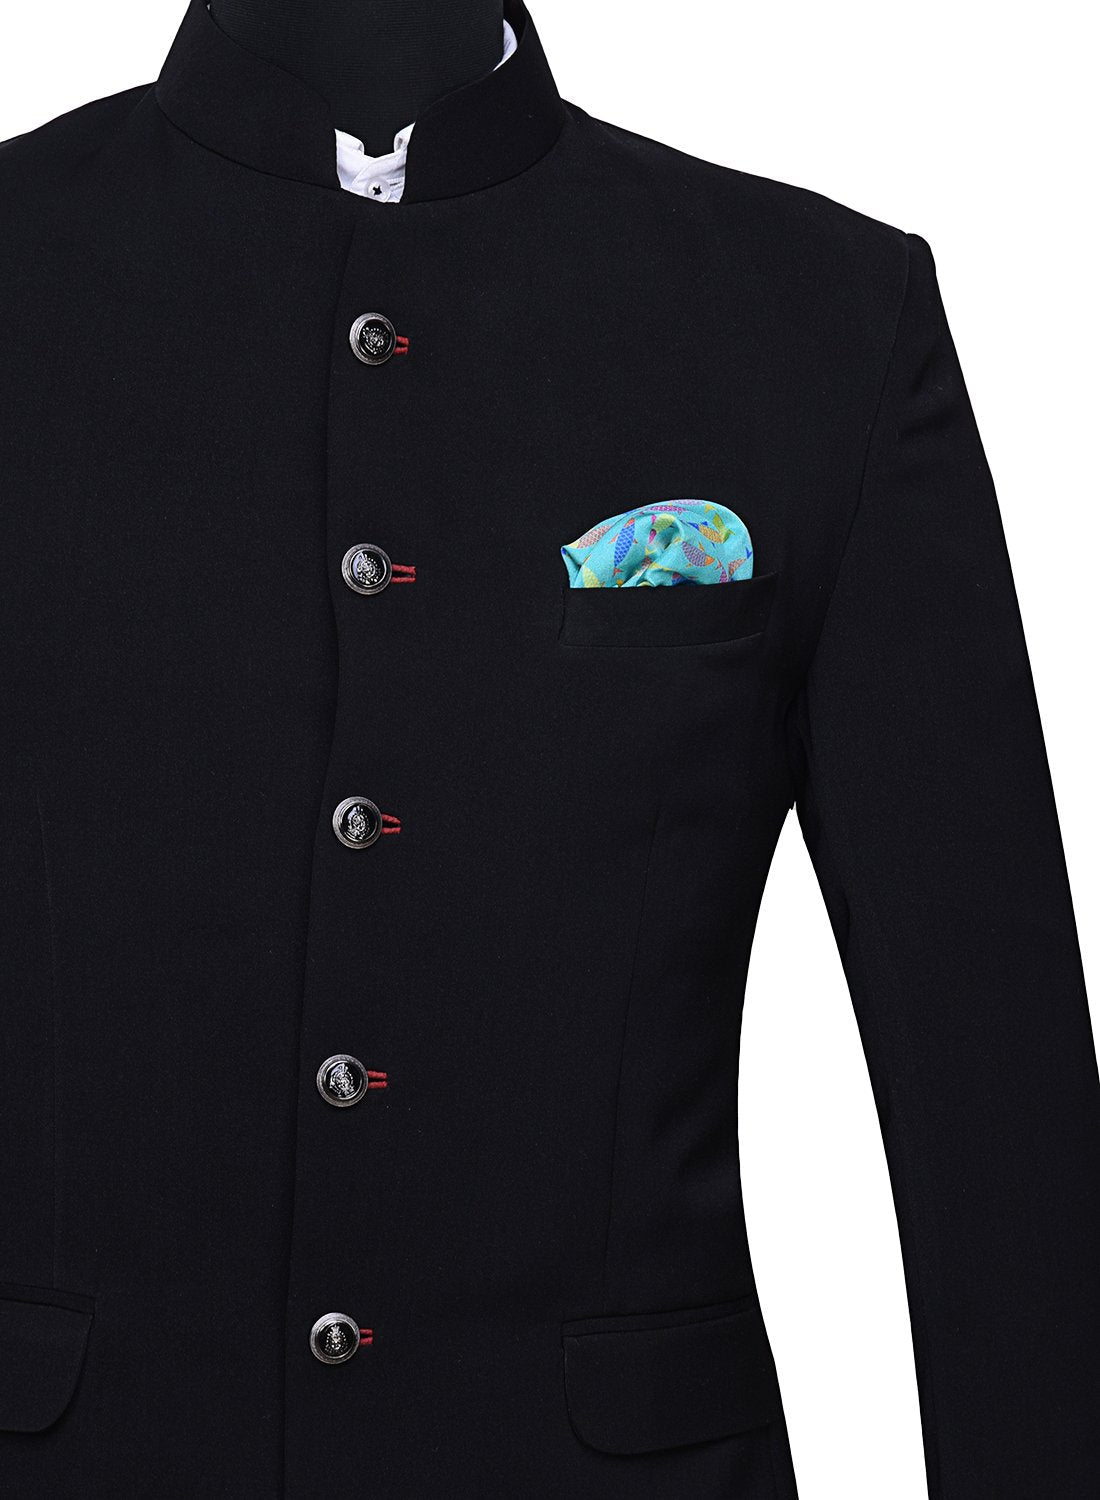 Chokore Multi-coloured Fishes Silk Pocket Square from the Wildlife range